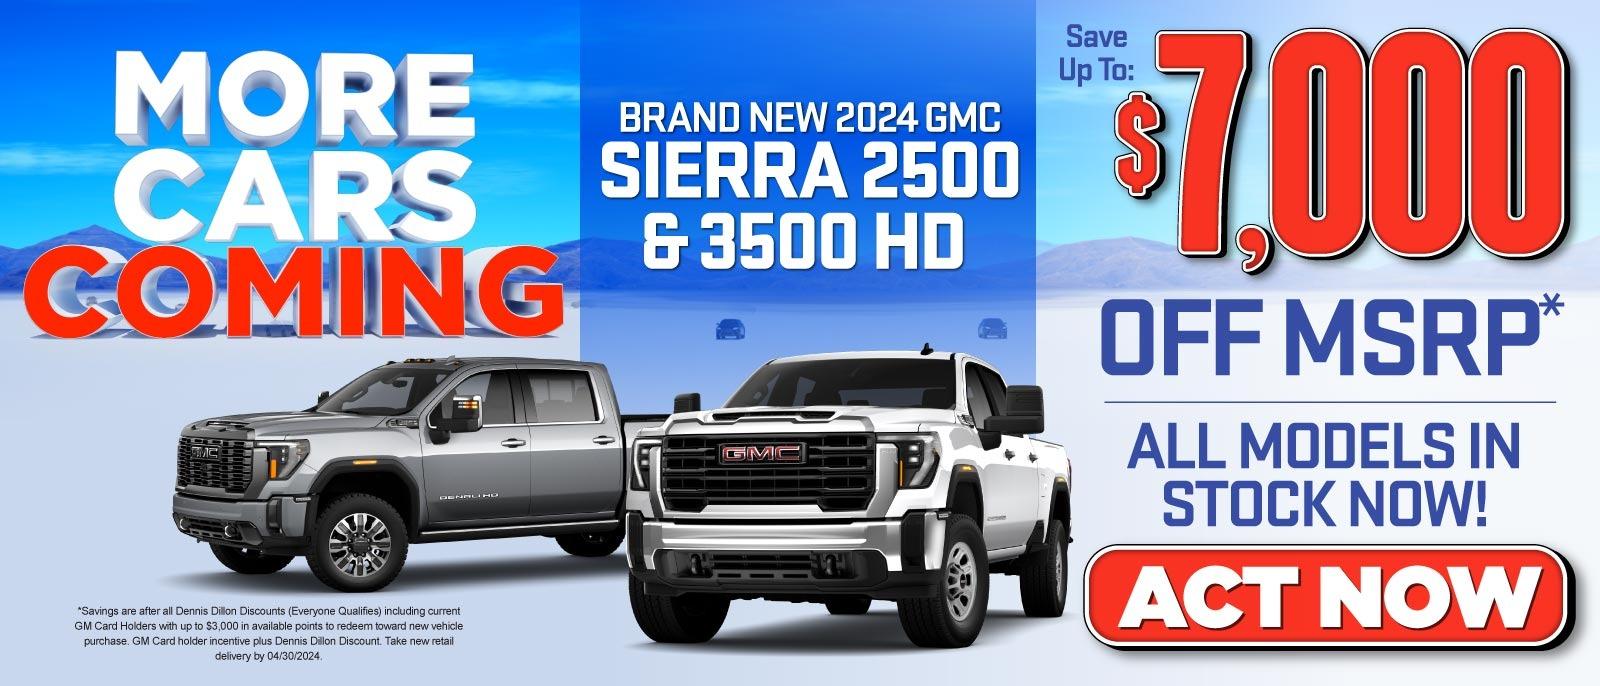 Brand New 2024 GMC Sierra 2500 & 3500 HD - Save Up To: $7,000 Off MSRP* | All Models In Stock Now! — Act Now